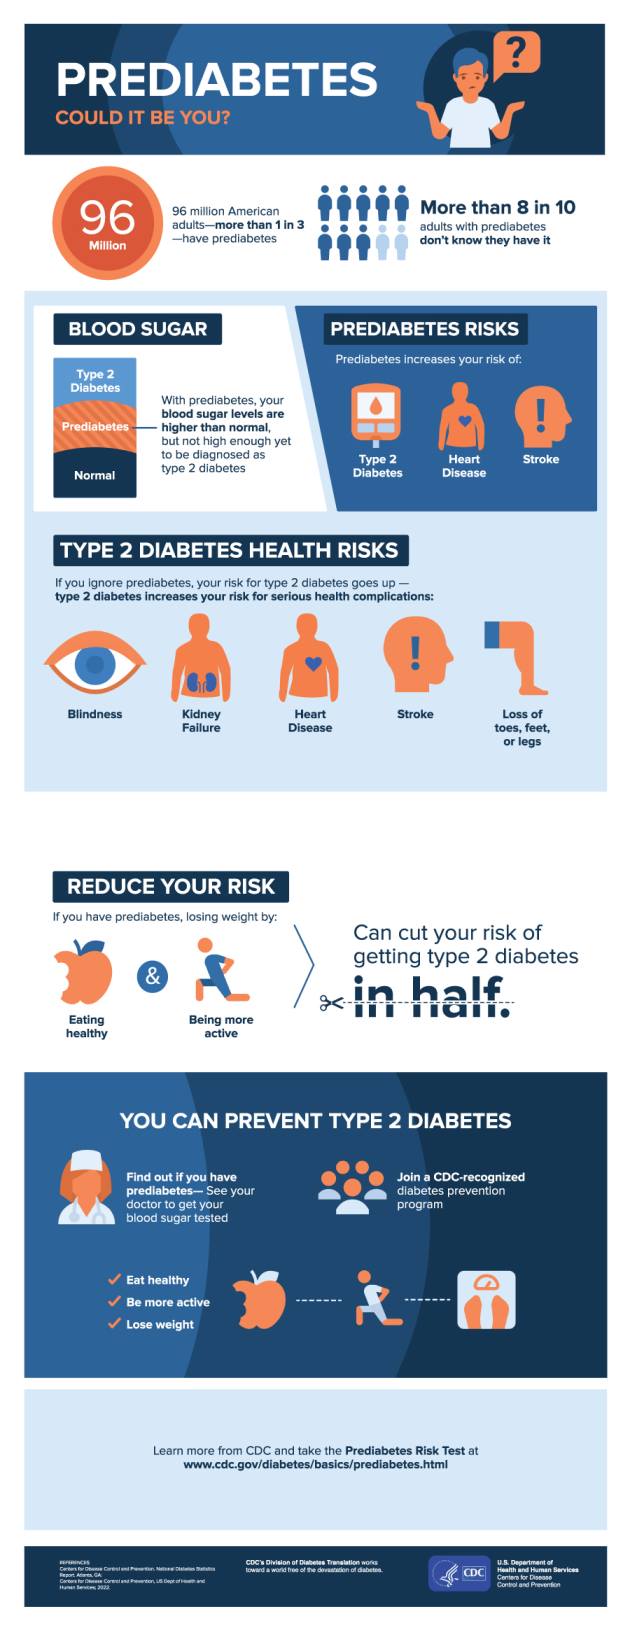 Prediabetes: Could it be You?